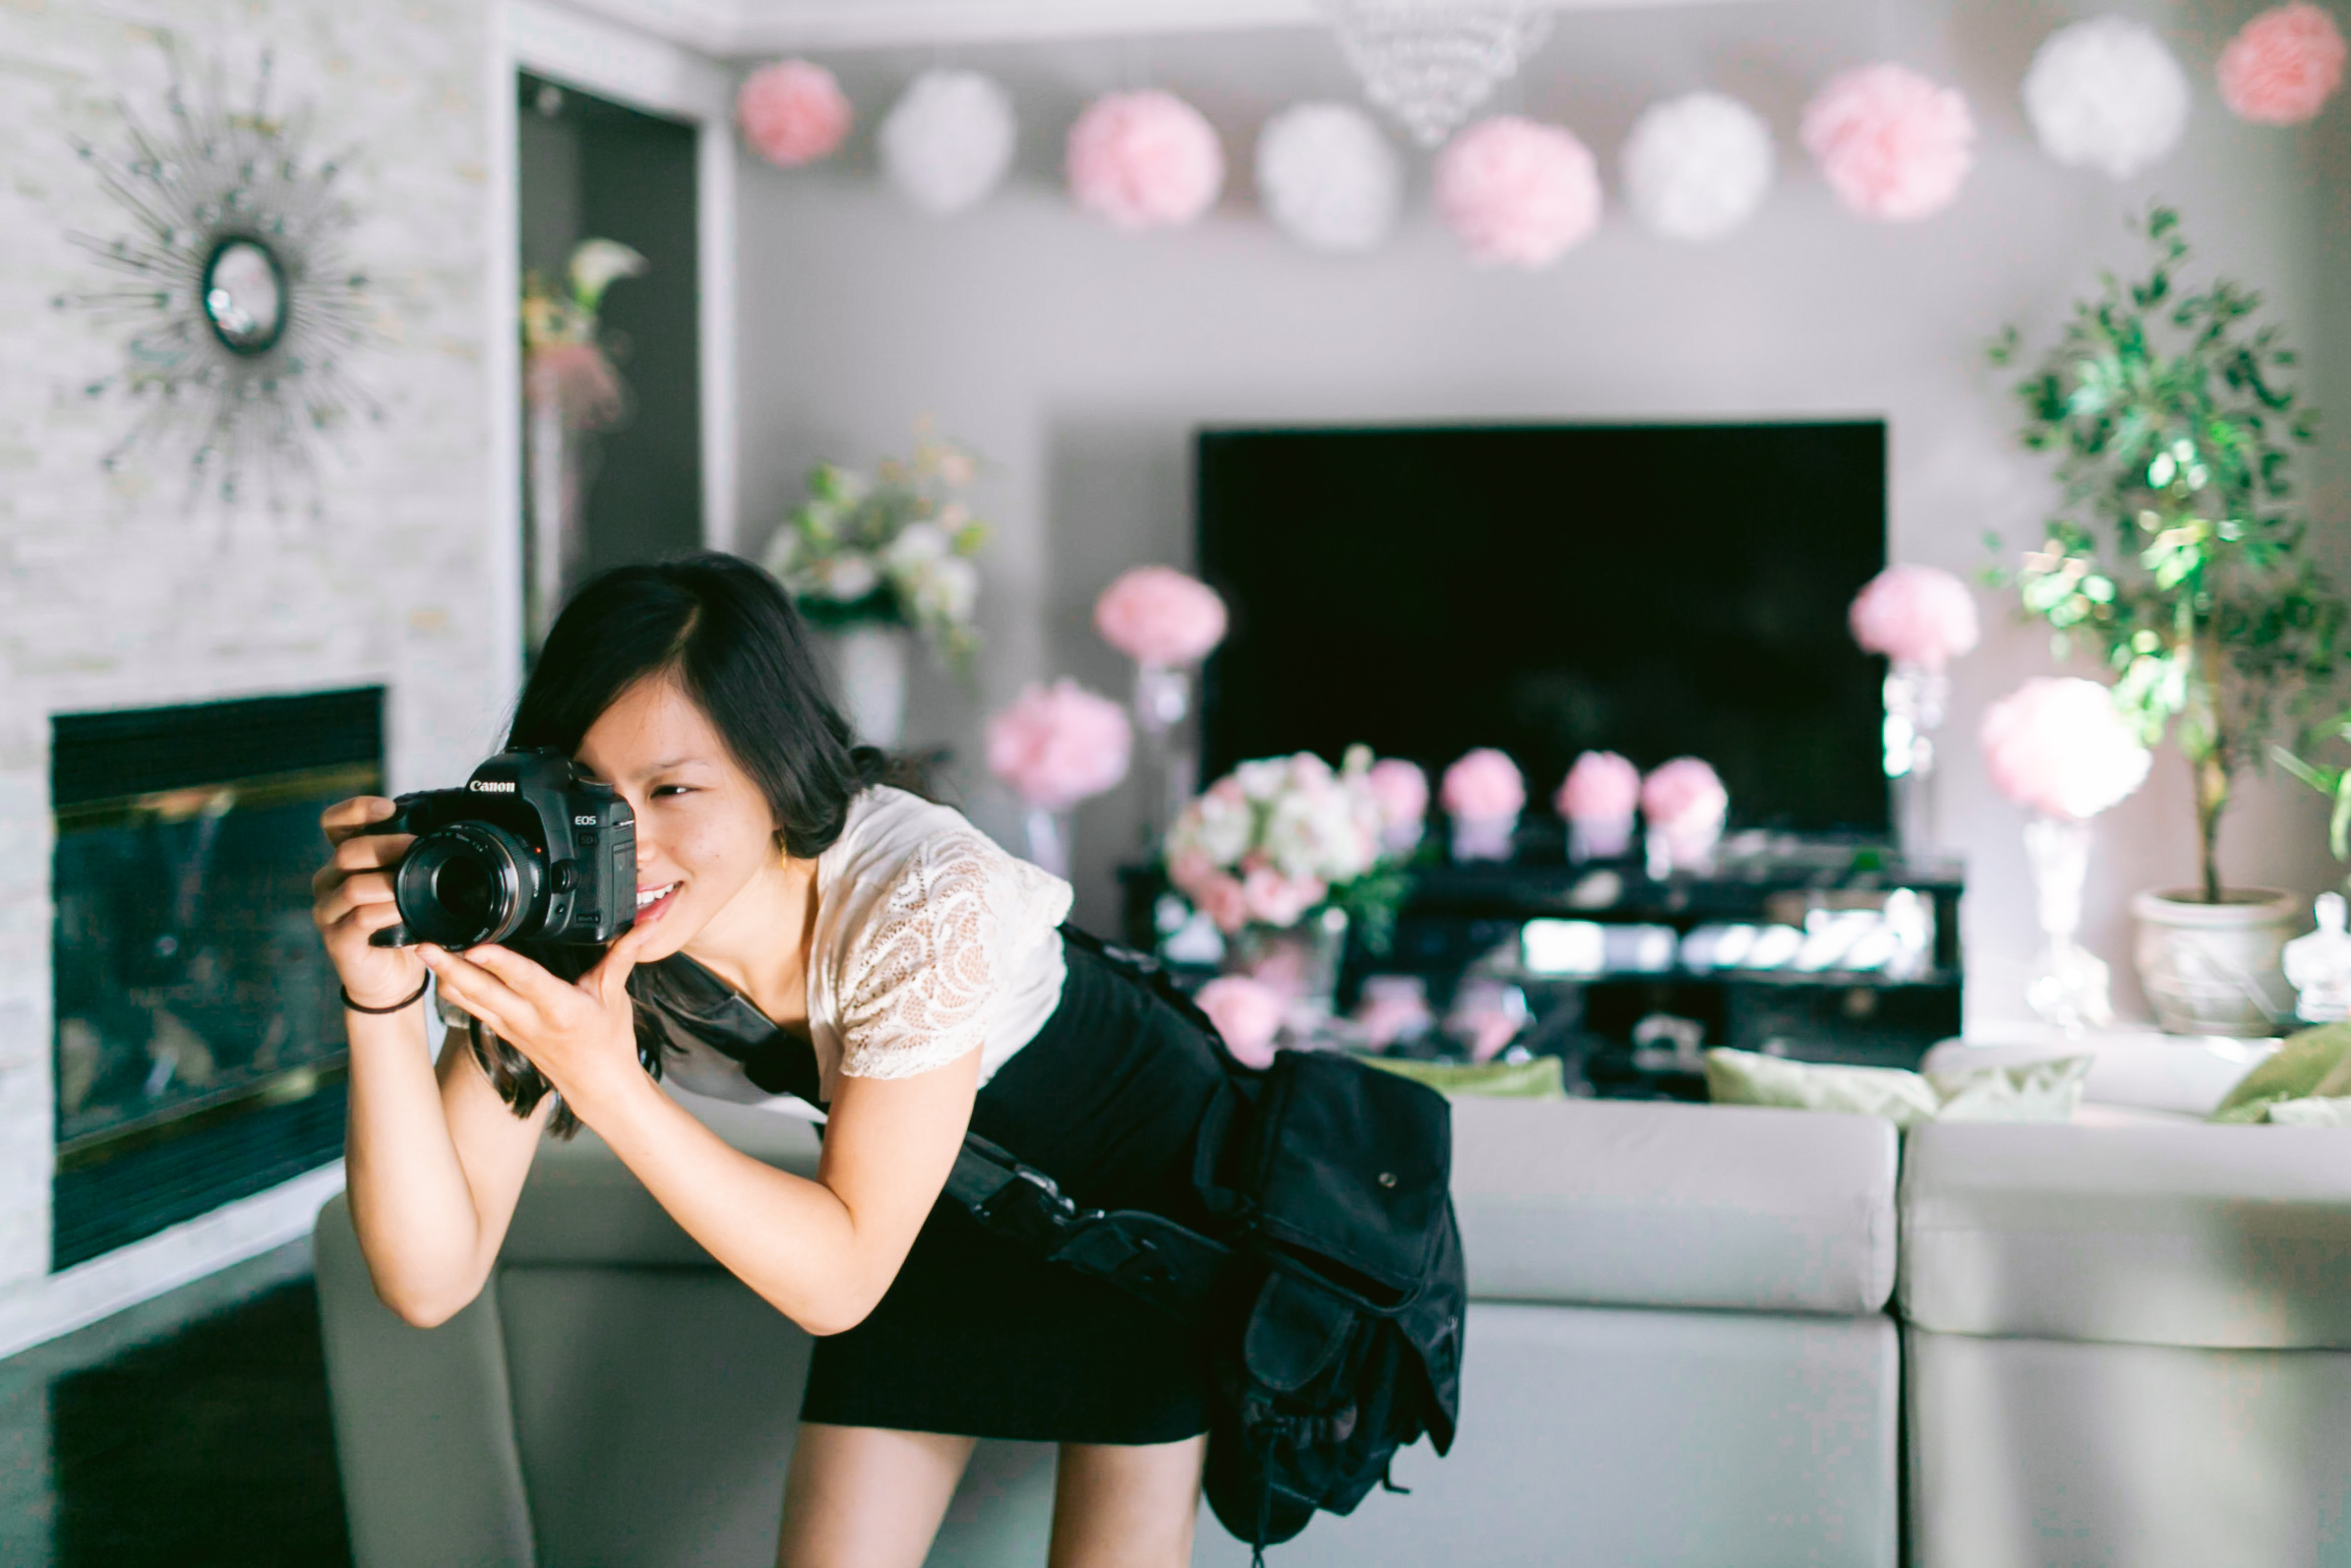 Behind-the-Scenes photo of Toronto wedding photographer, Jessica Hoang, capturing moments at a wedding.